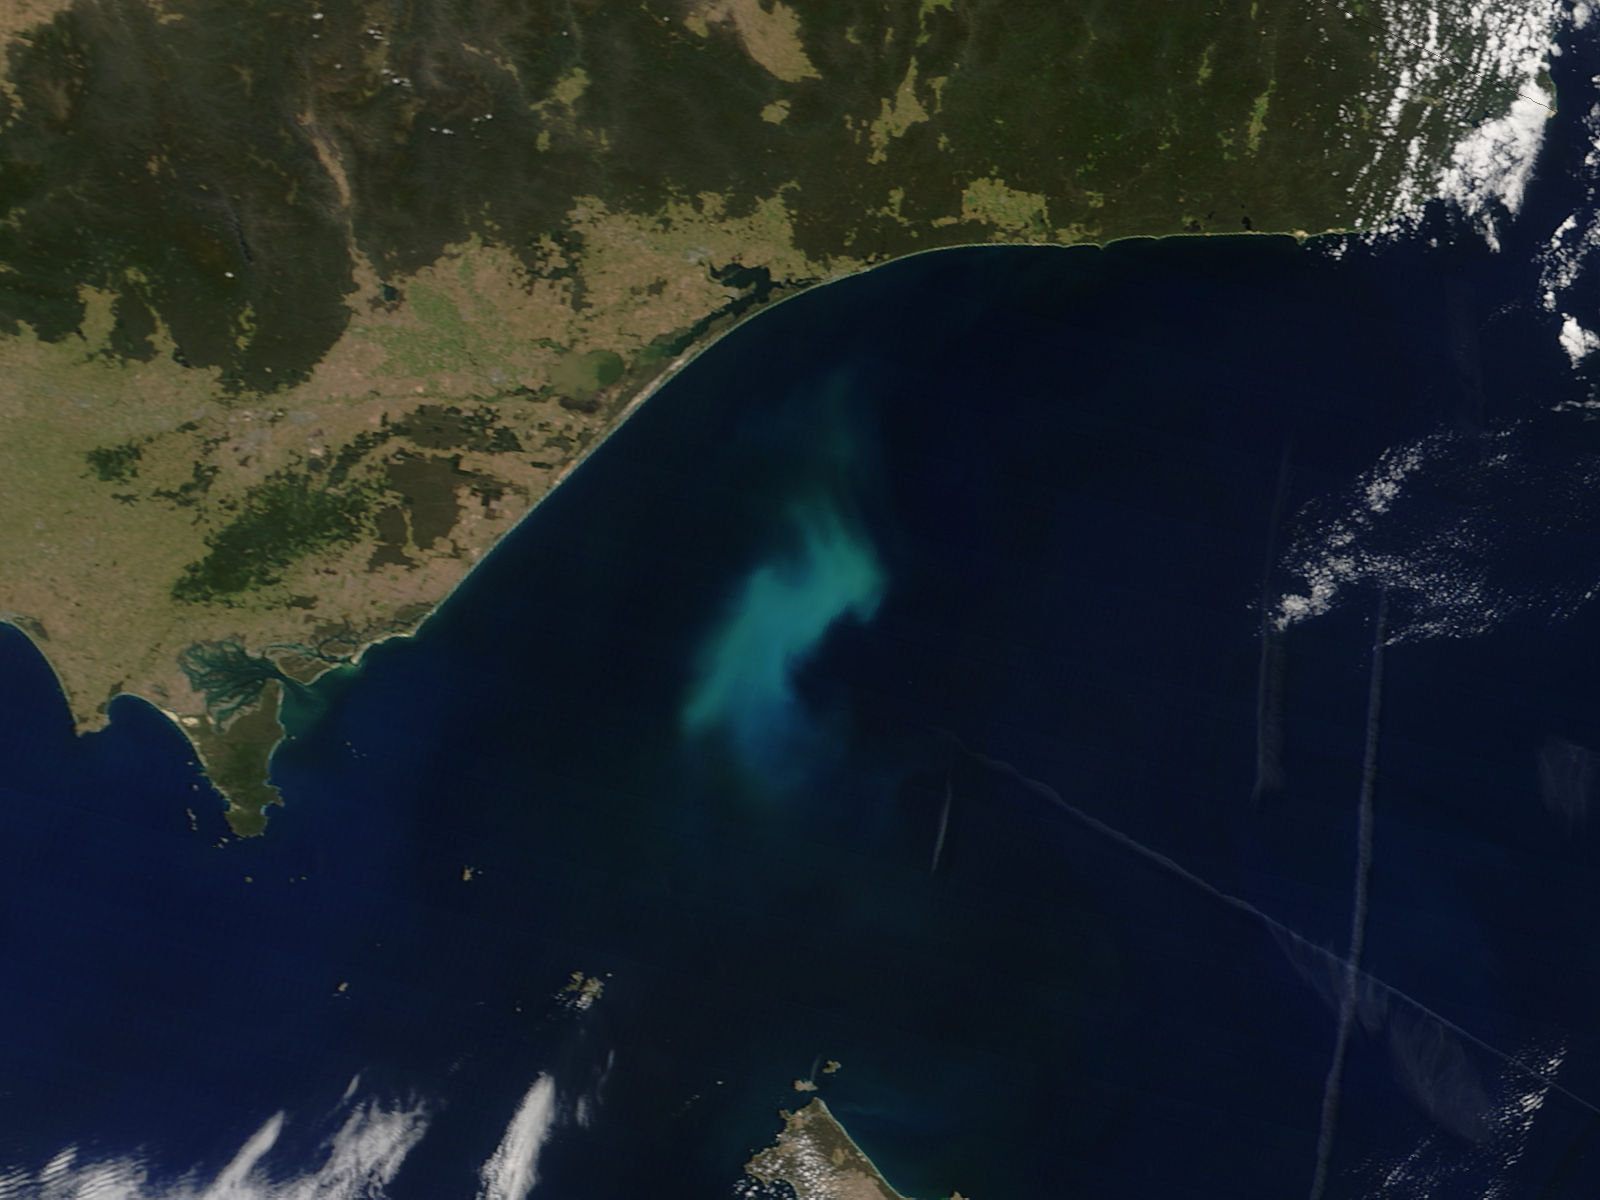 Phytoplankton bloom off southeastern Australia - related image preview